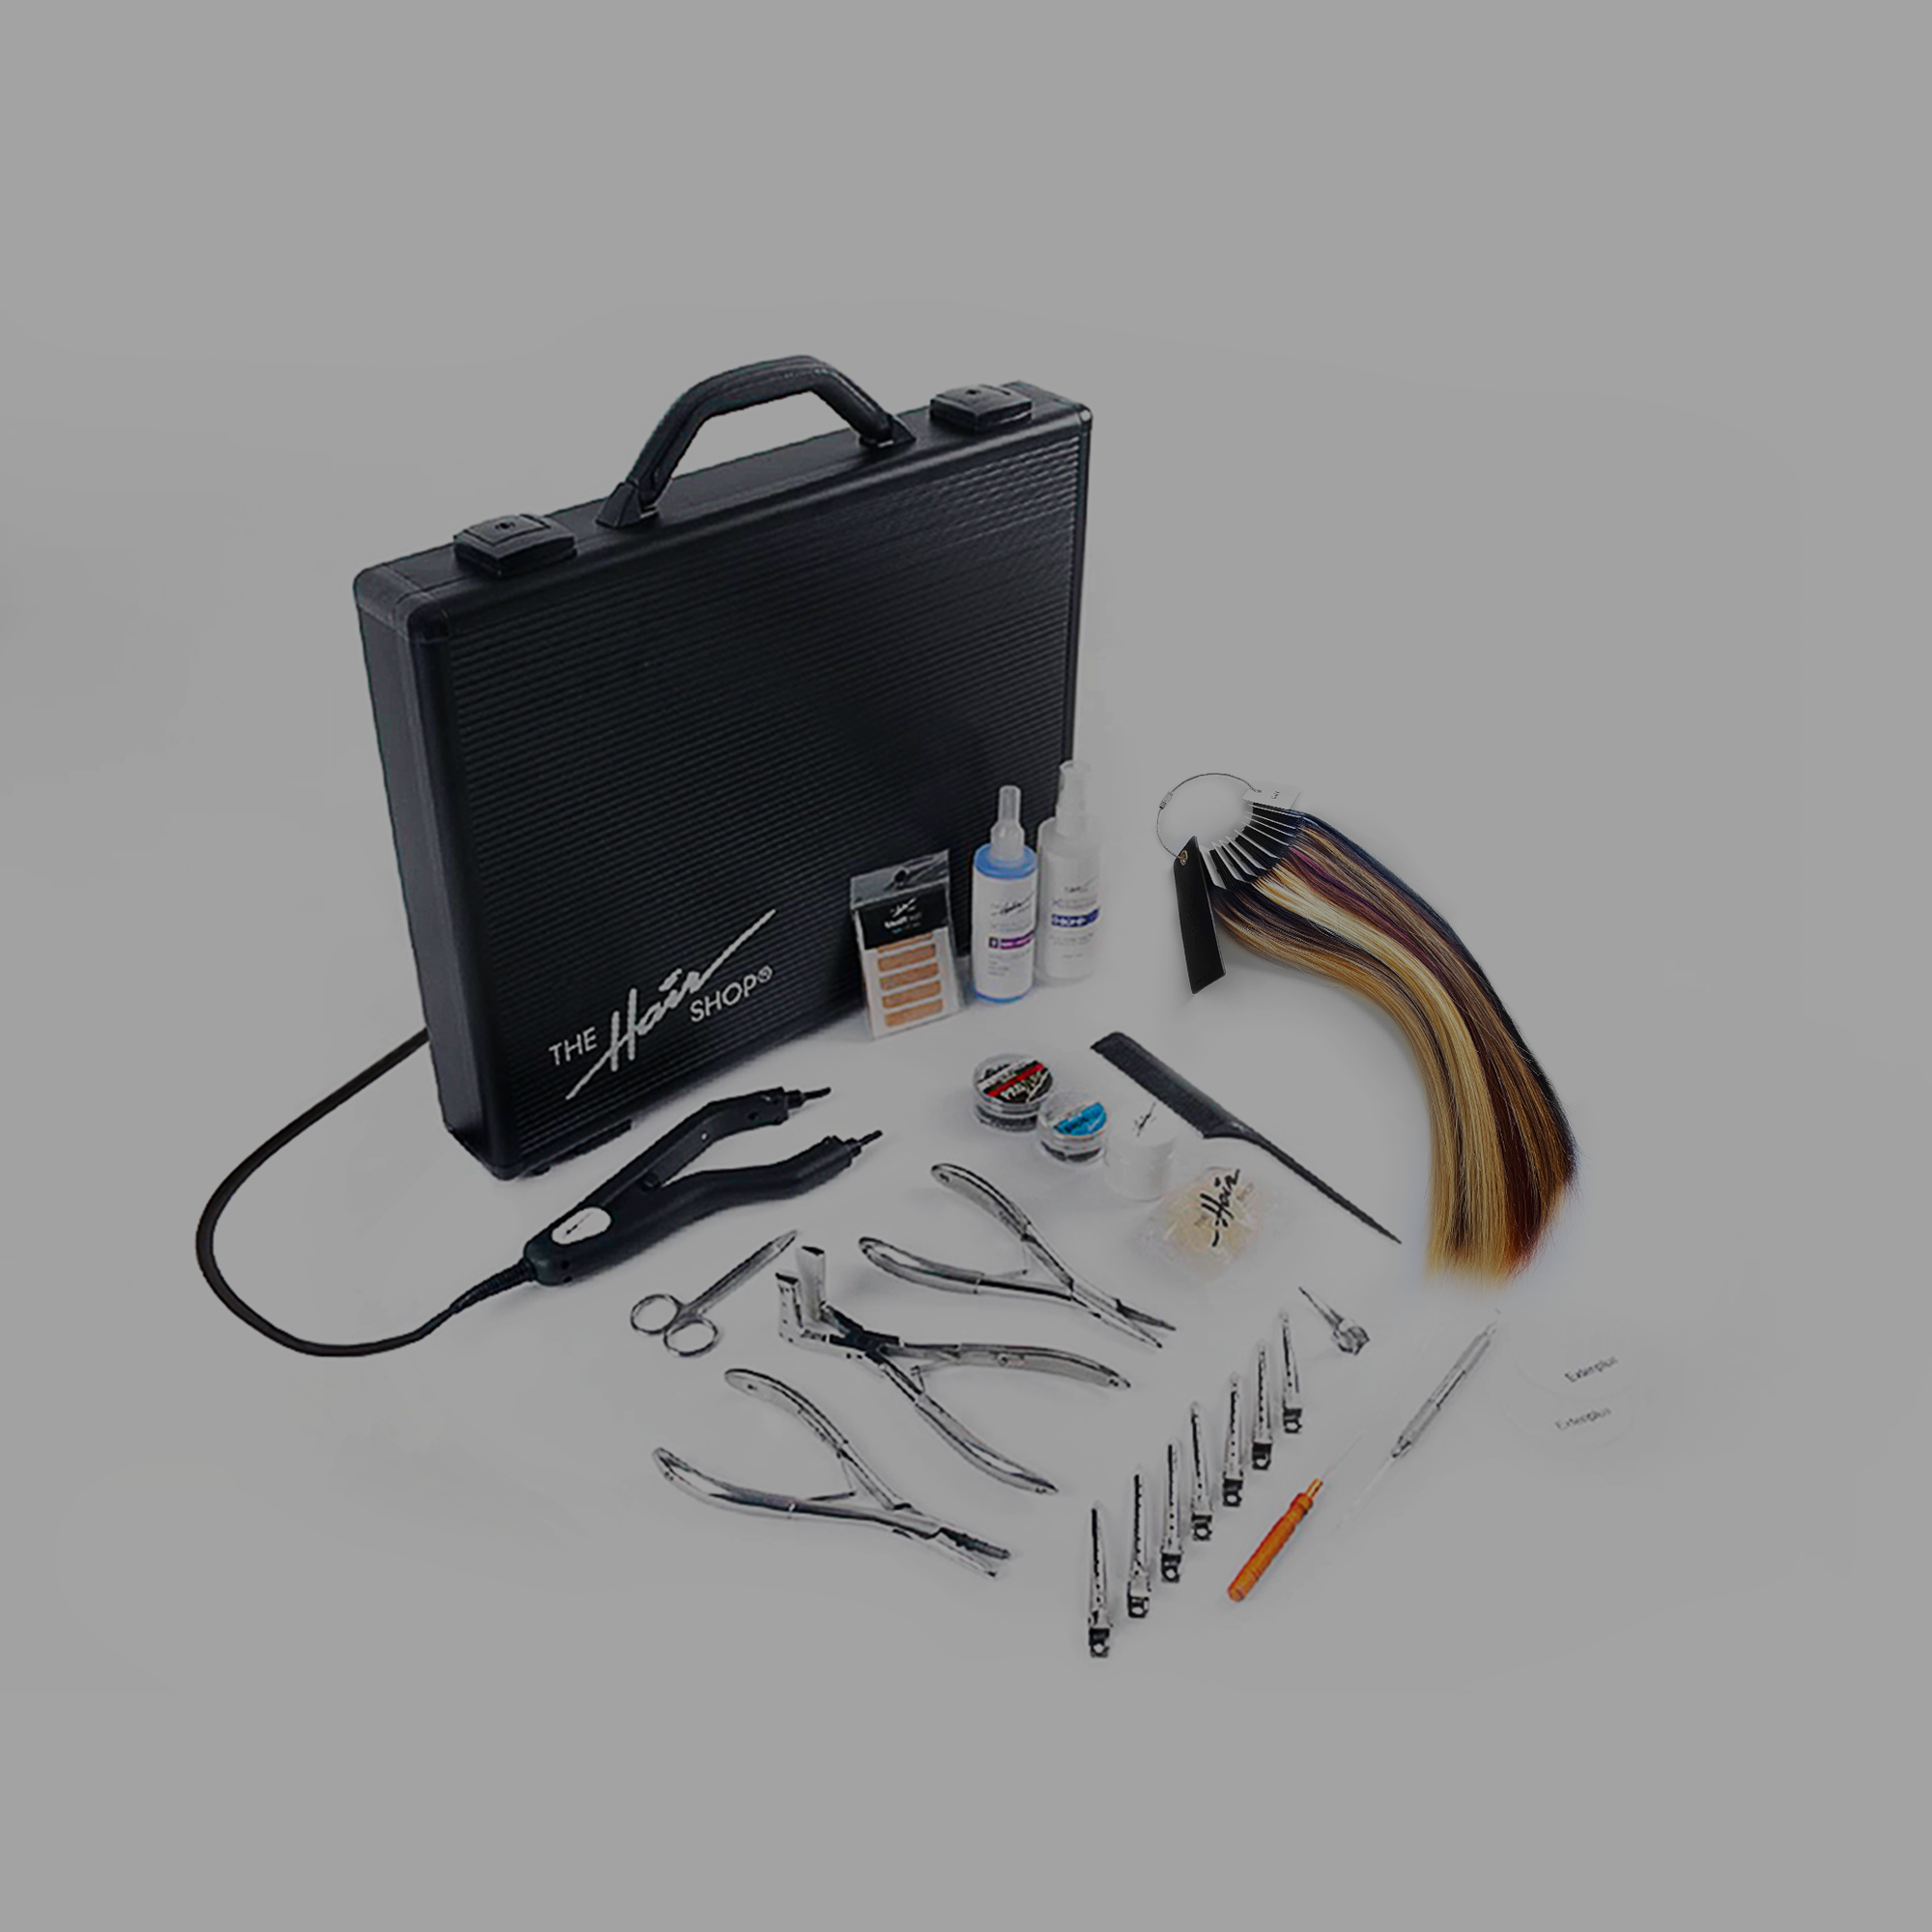 Display of the Extension Master Kit with all tools and accessories included